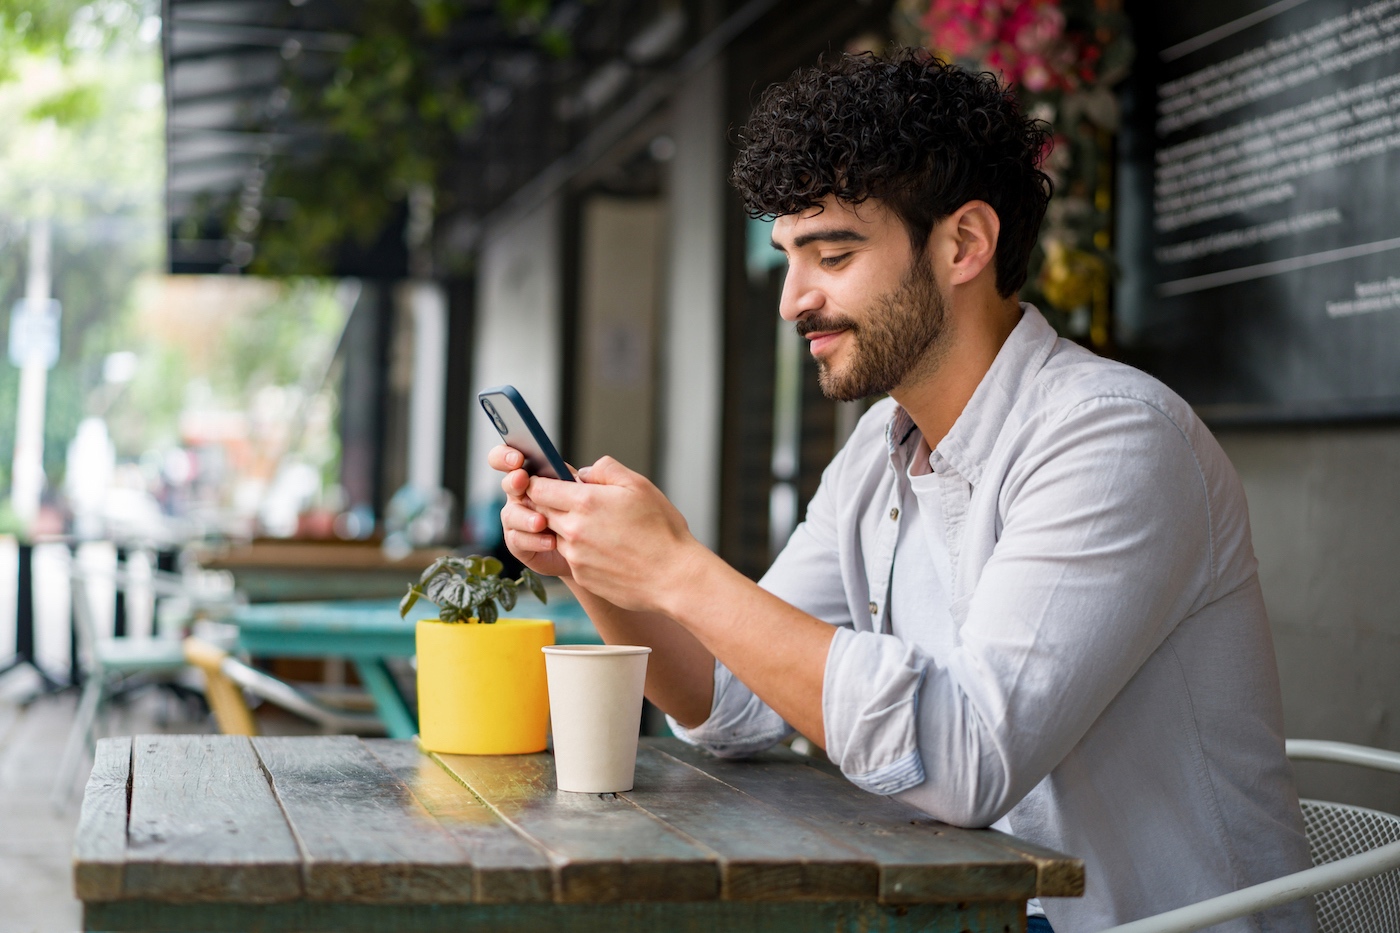 Remote worker using his smartphone at an outdoor café, highlighting the importance of mobile device management